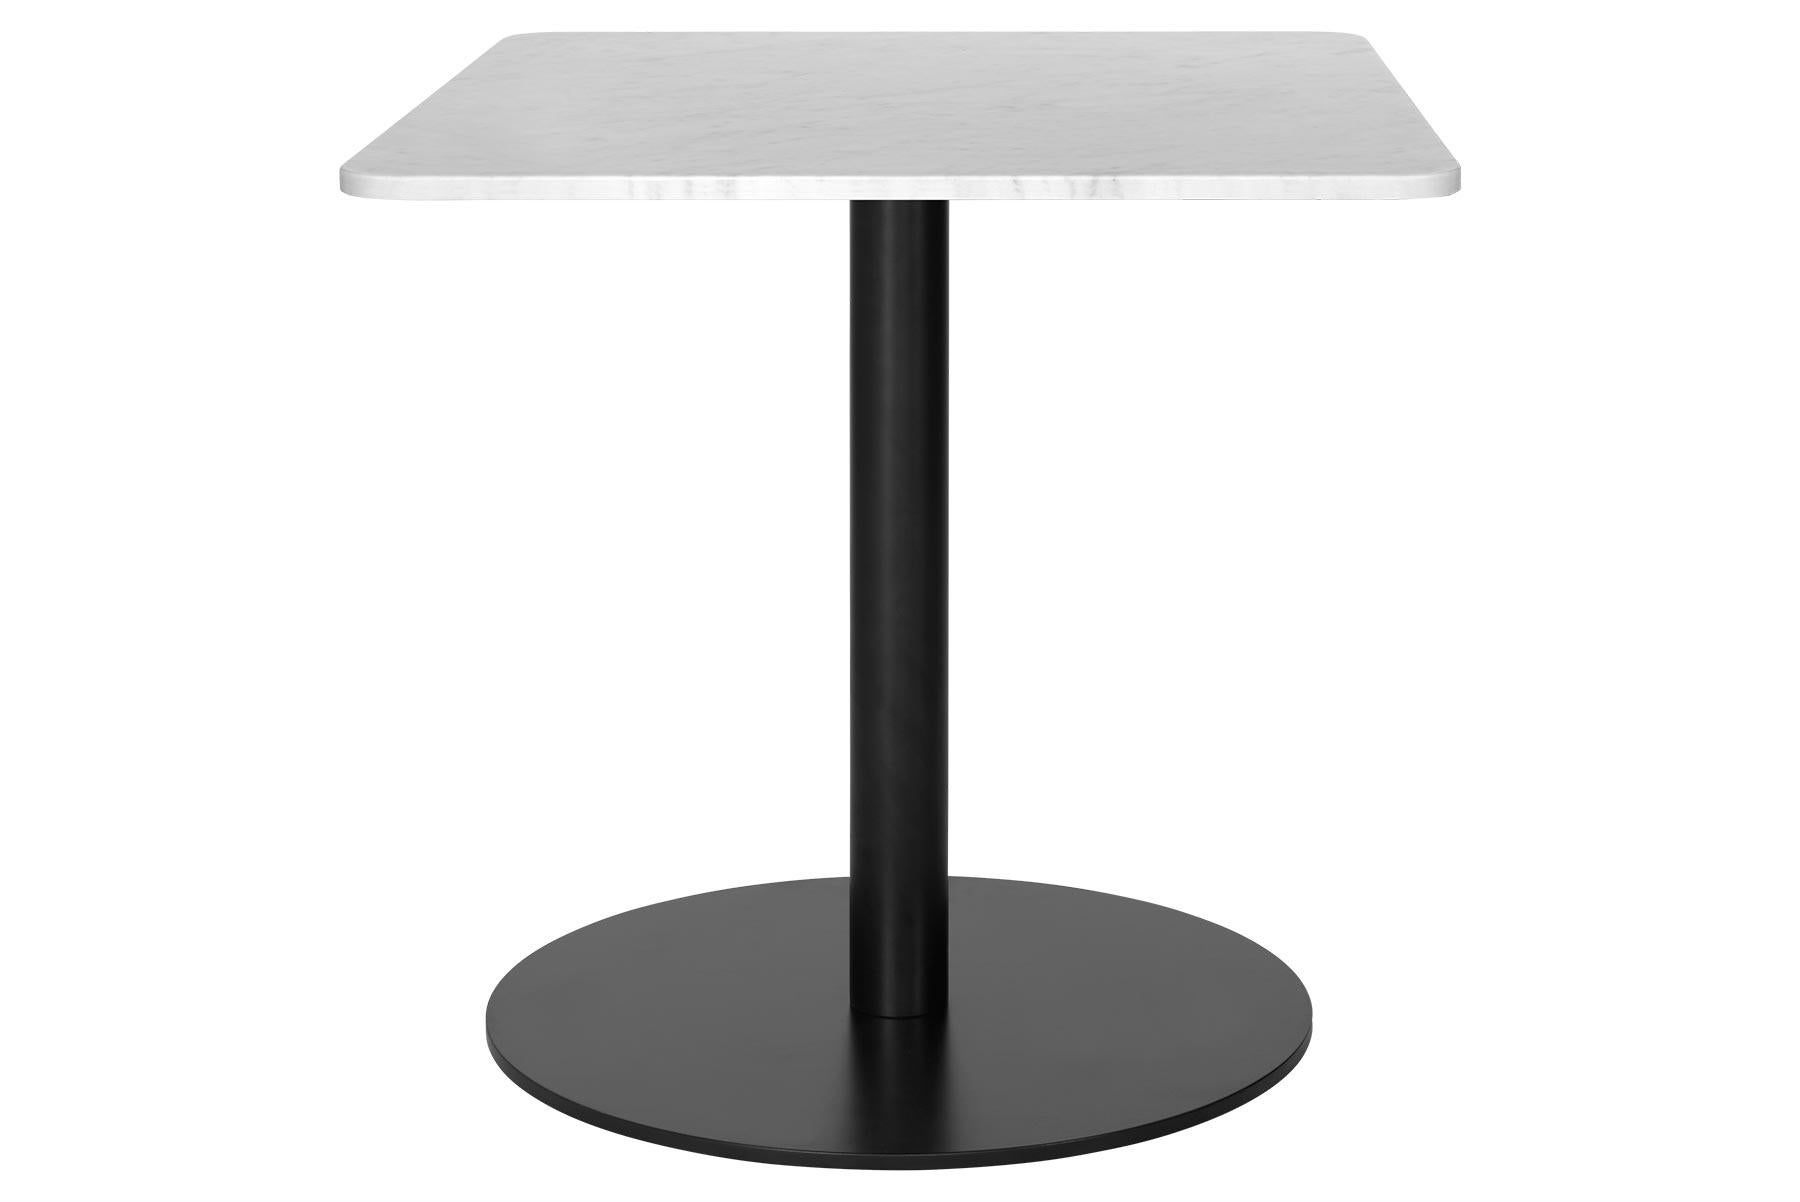 The Gubi 1.0 lounge table, designed by Gubi, is driven by the theme of lightness. The slender central column base makes a beautiful impact on its light expression and visual simplicity. With its rounded or squared table top in various sizes and